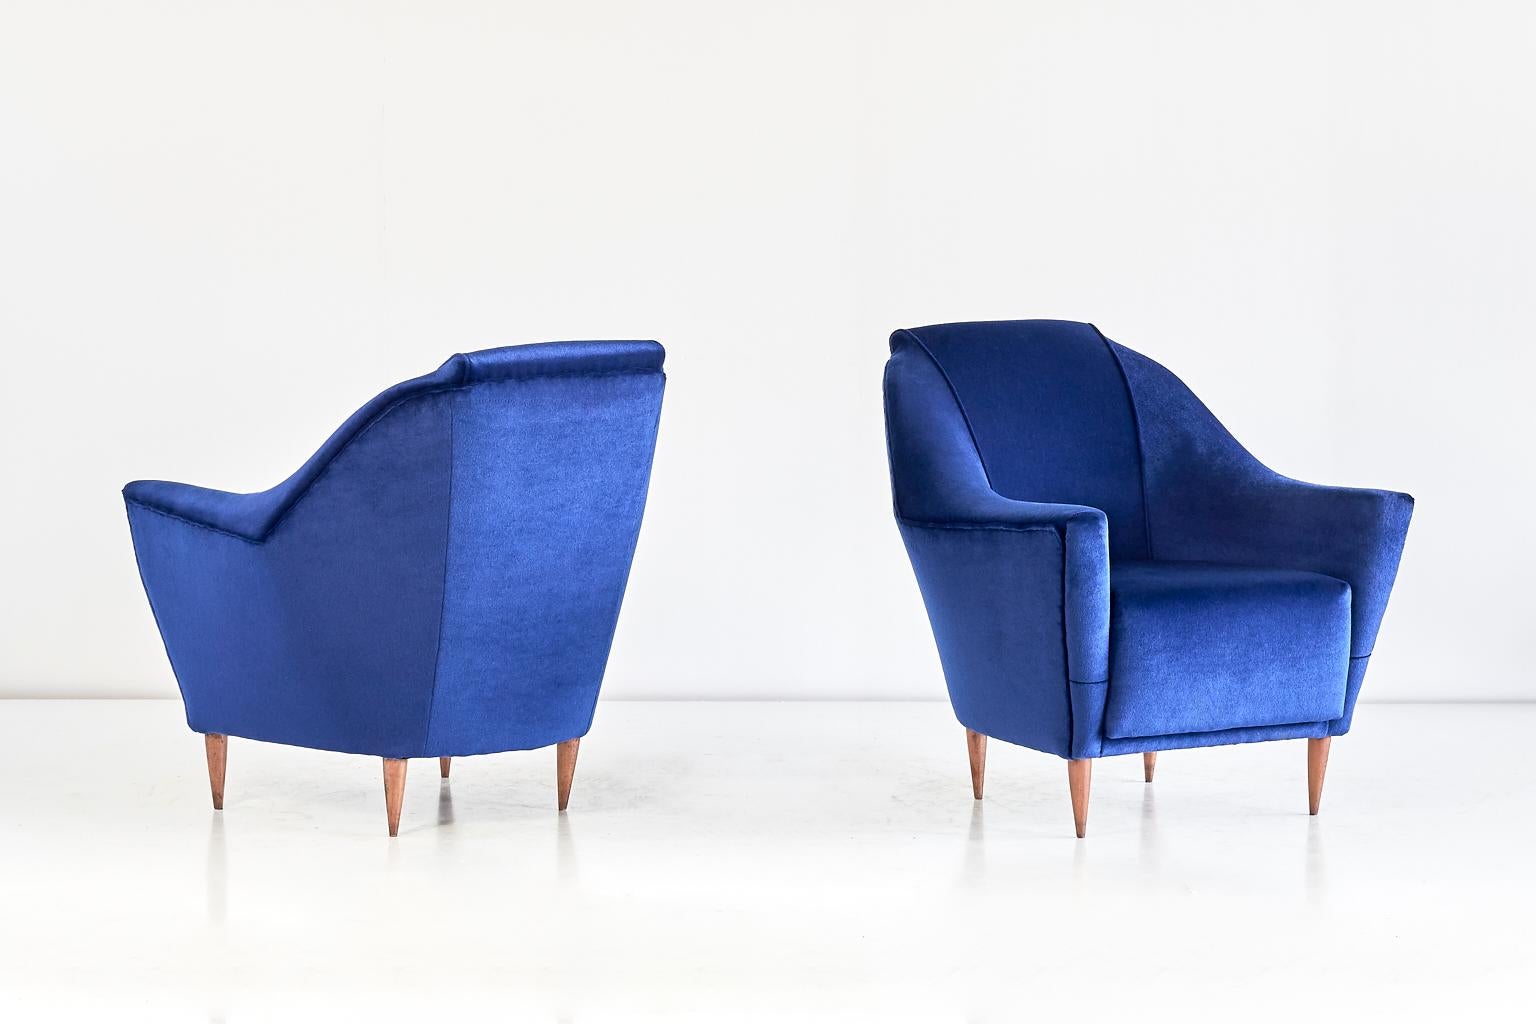 Pair of Ico Parisi Armchairs in Blue Velvet for Ariberto Colombo, Italy, 1951 For Sale 4